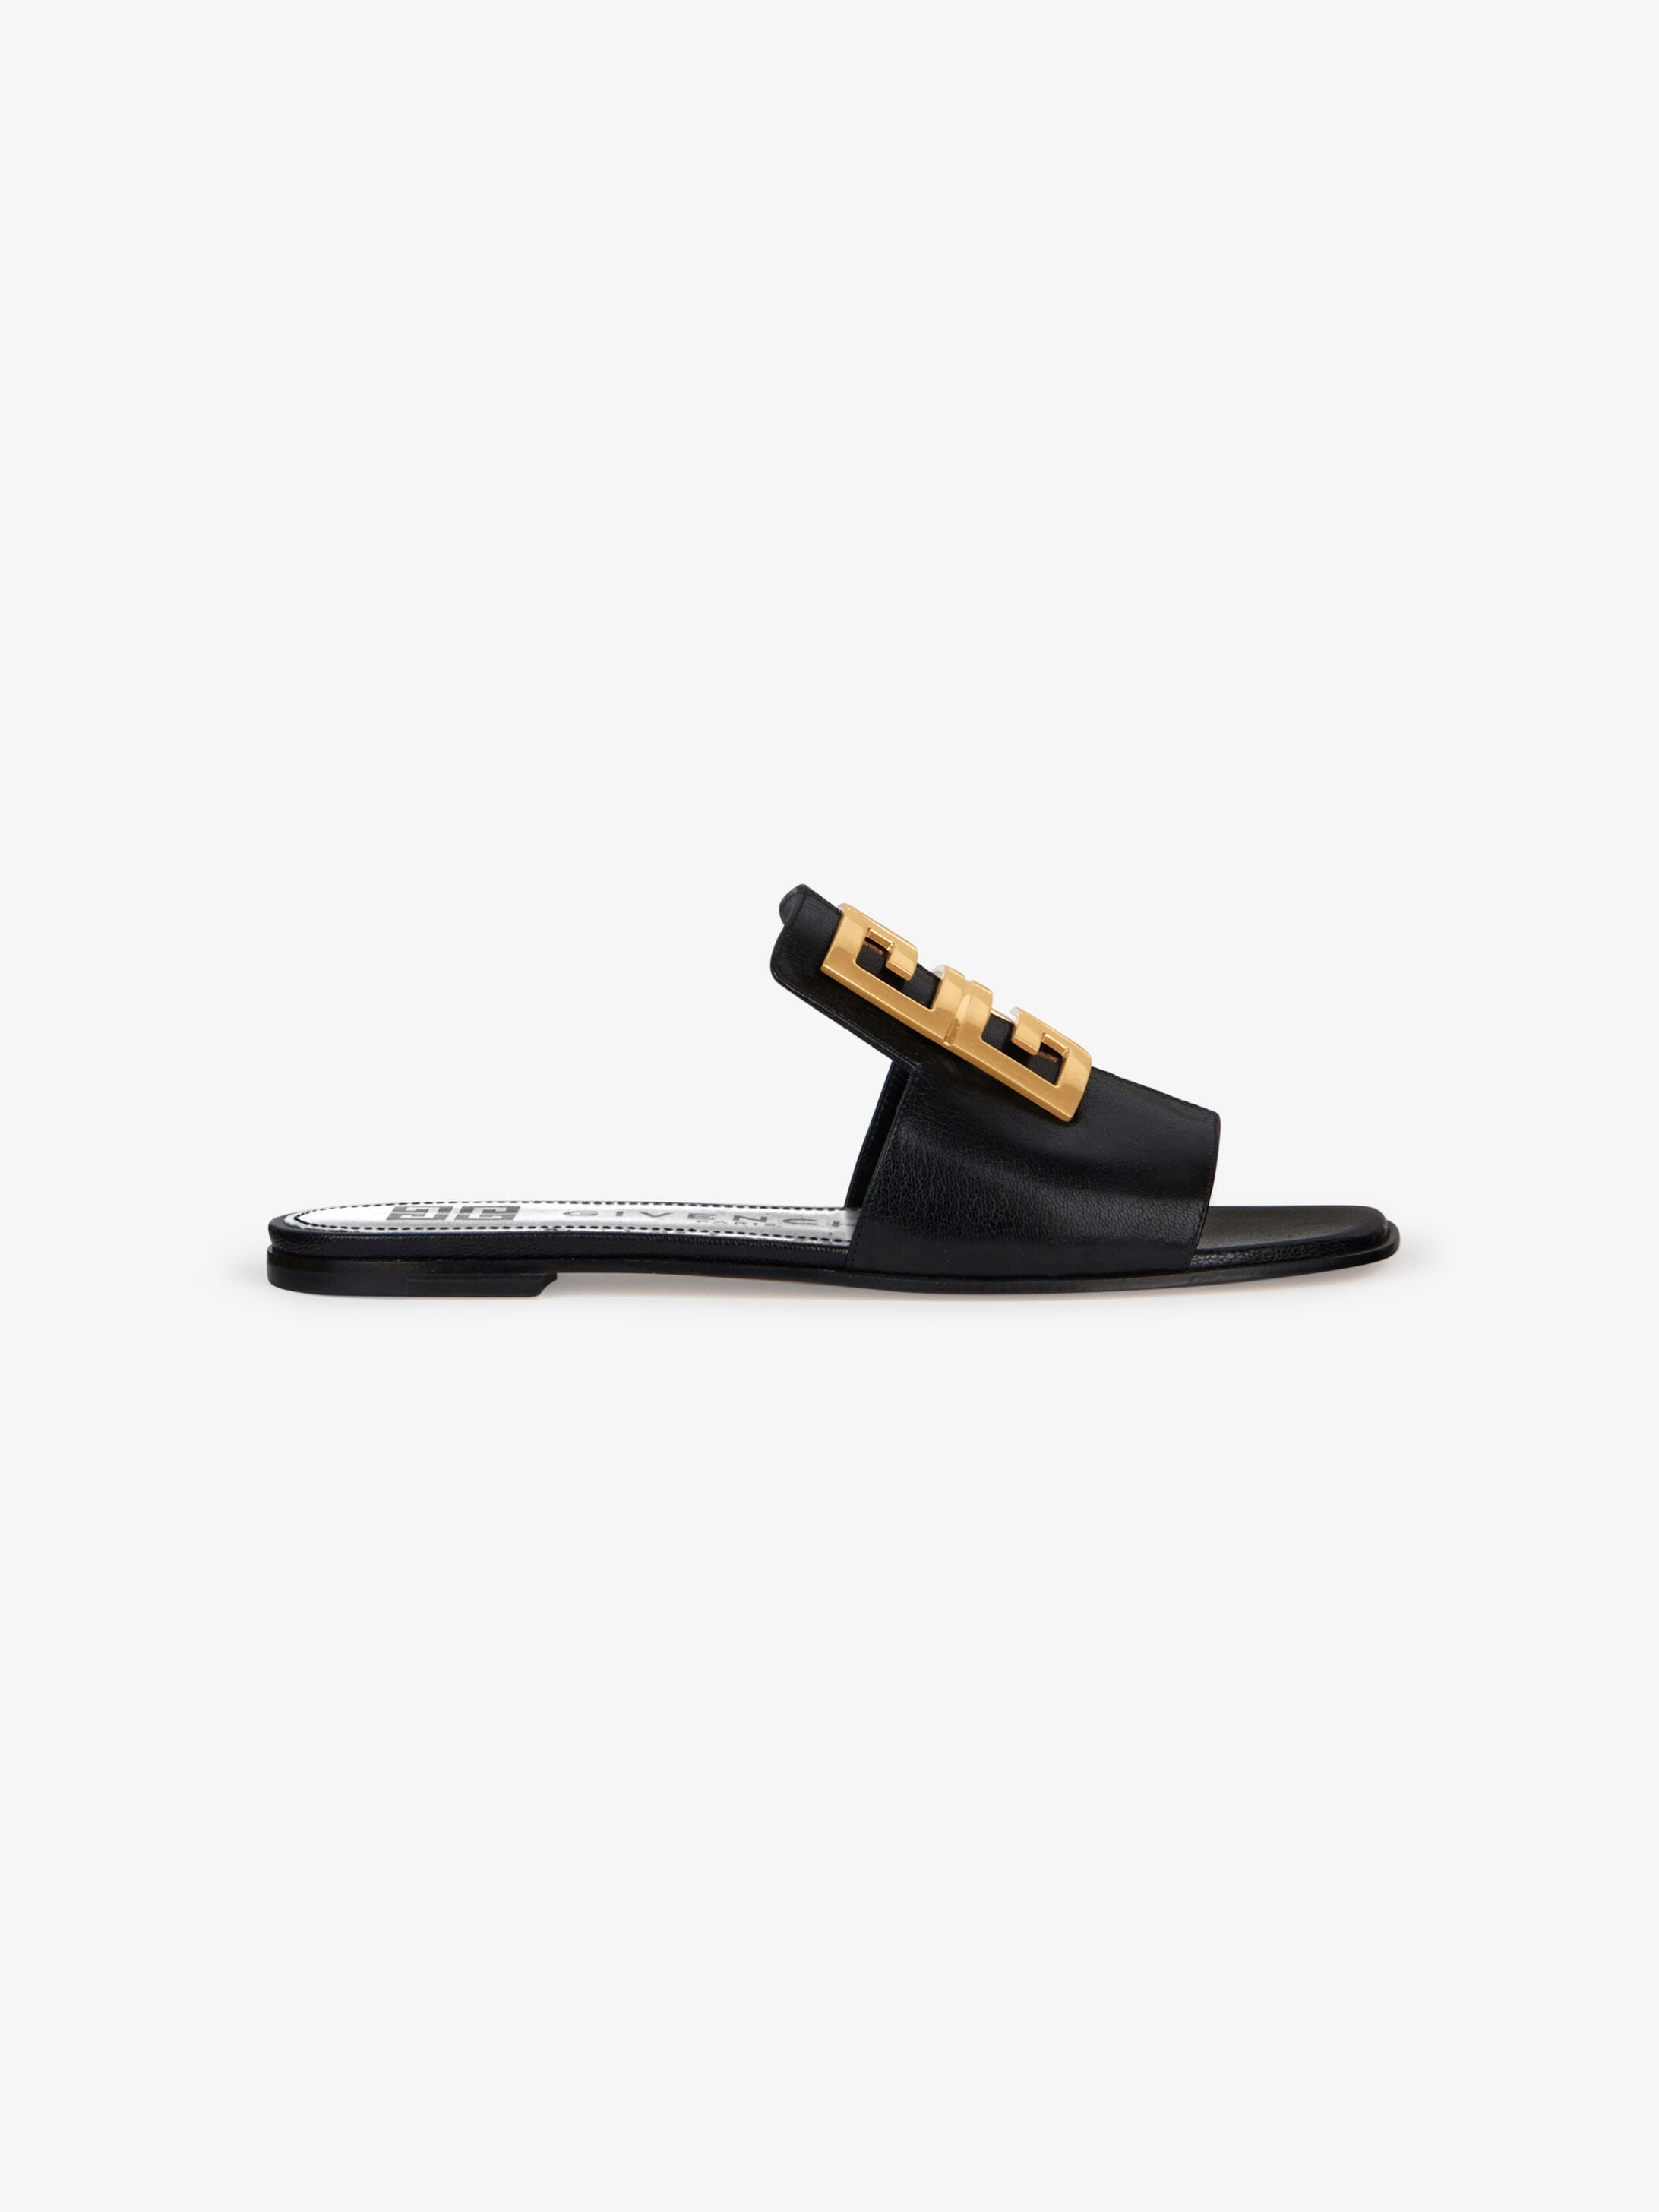 givenchy shoes sandals